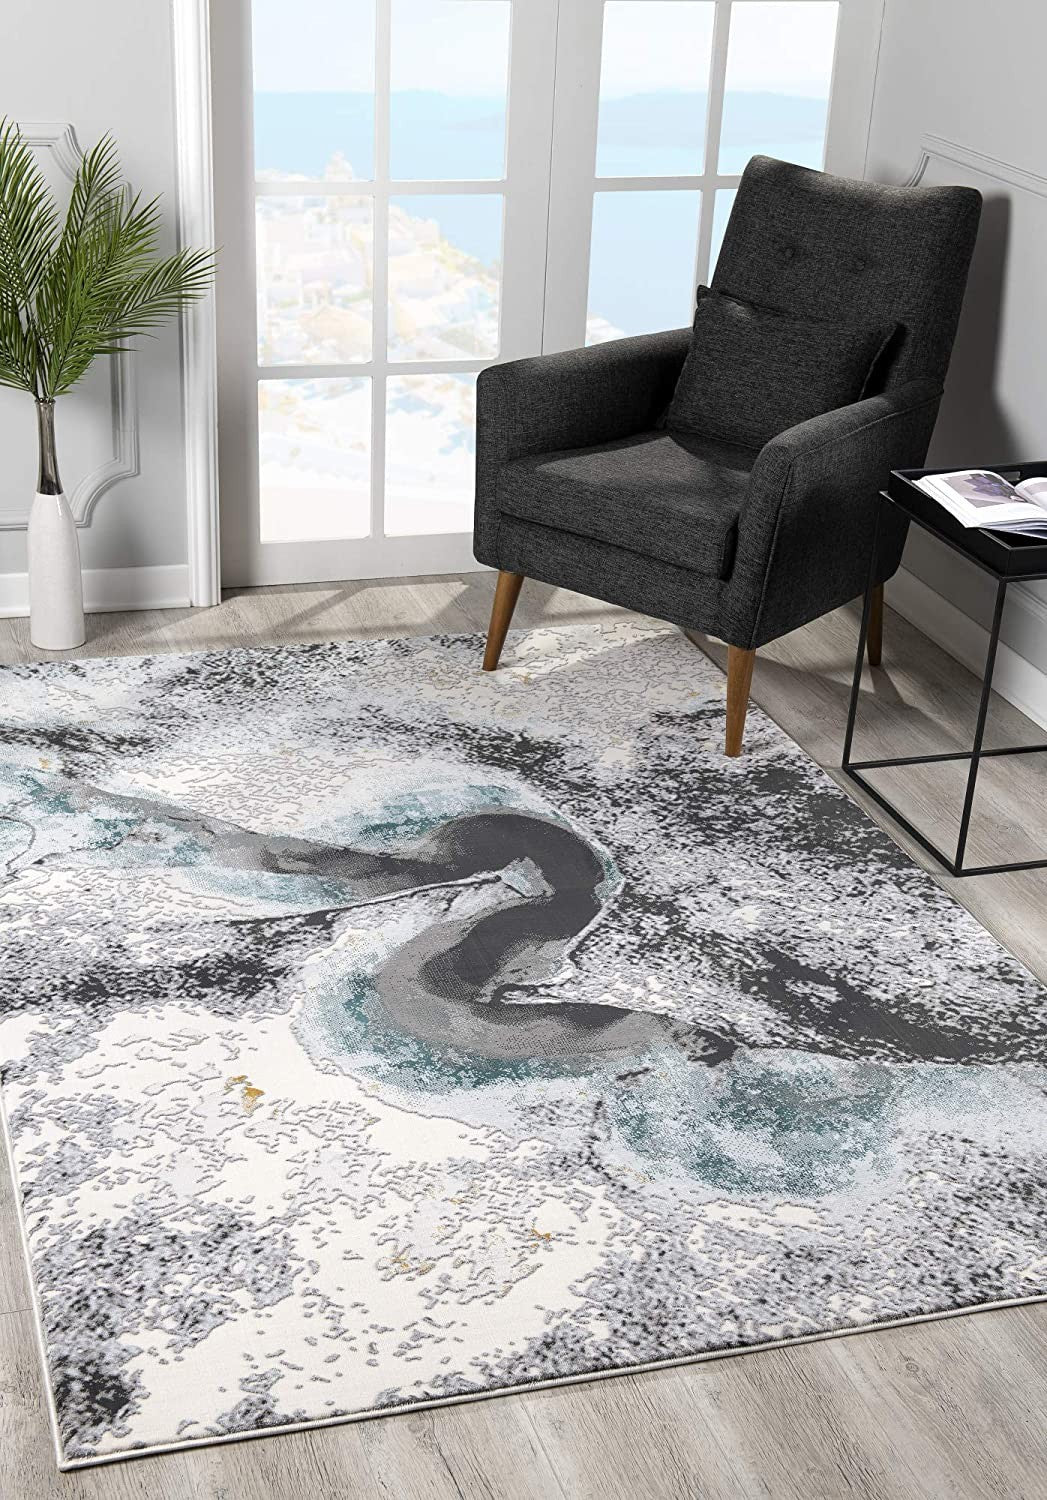 5’ X 8’ Black And Gray Abstract Whirlpool Area Rug